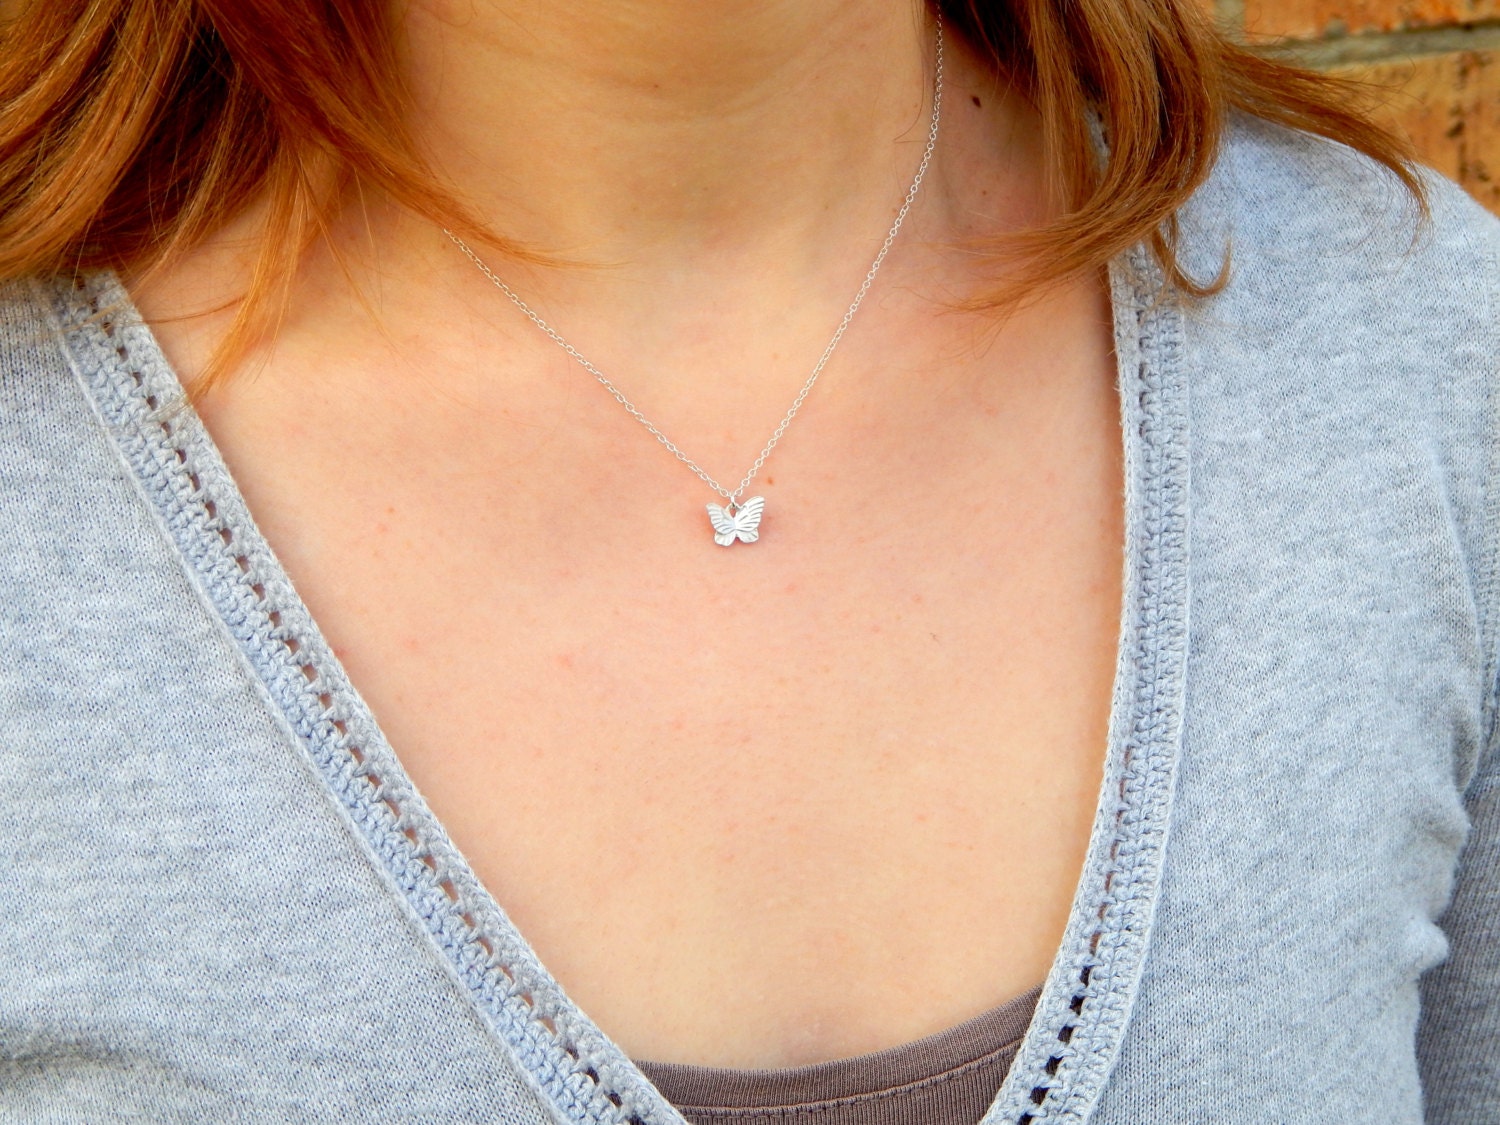 Download Small silver butterfly charm necklace tiny butterfly necklace